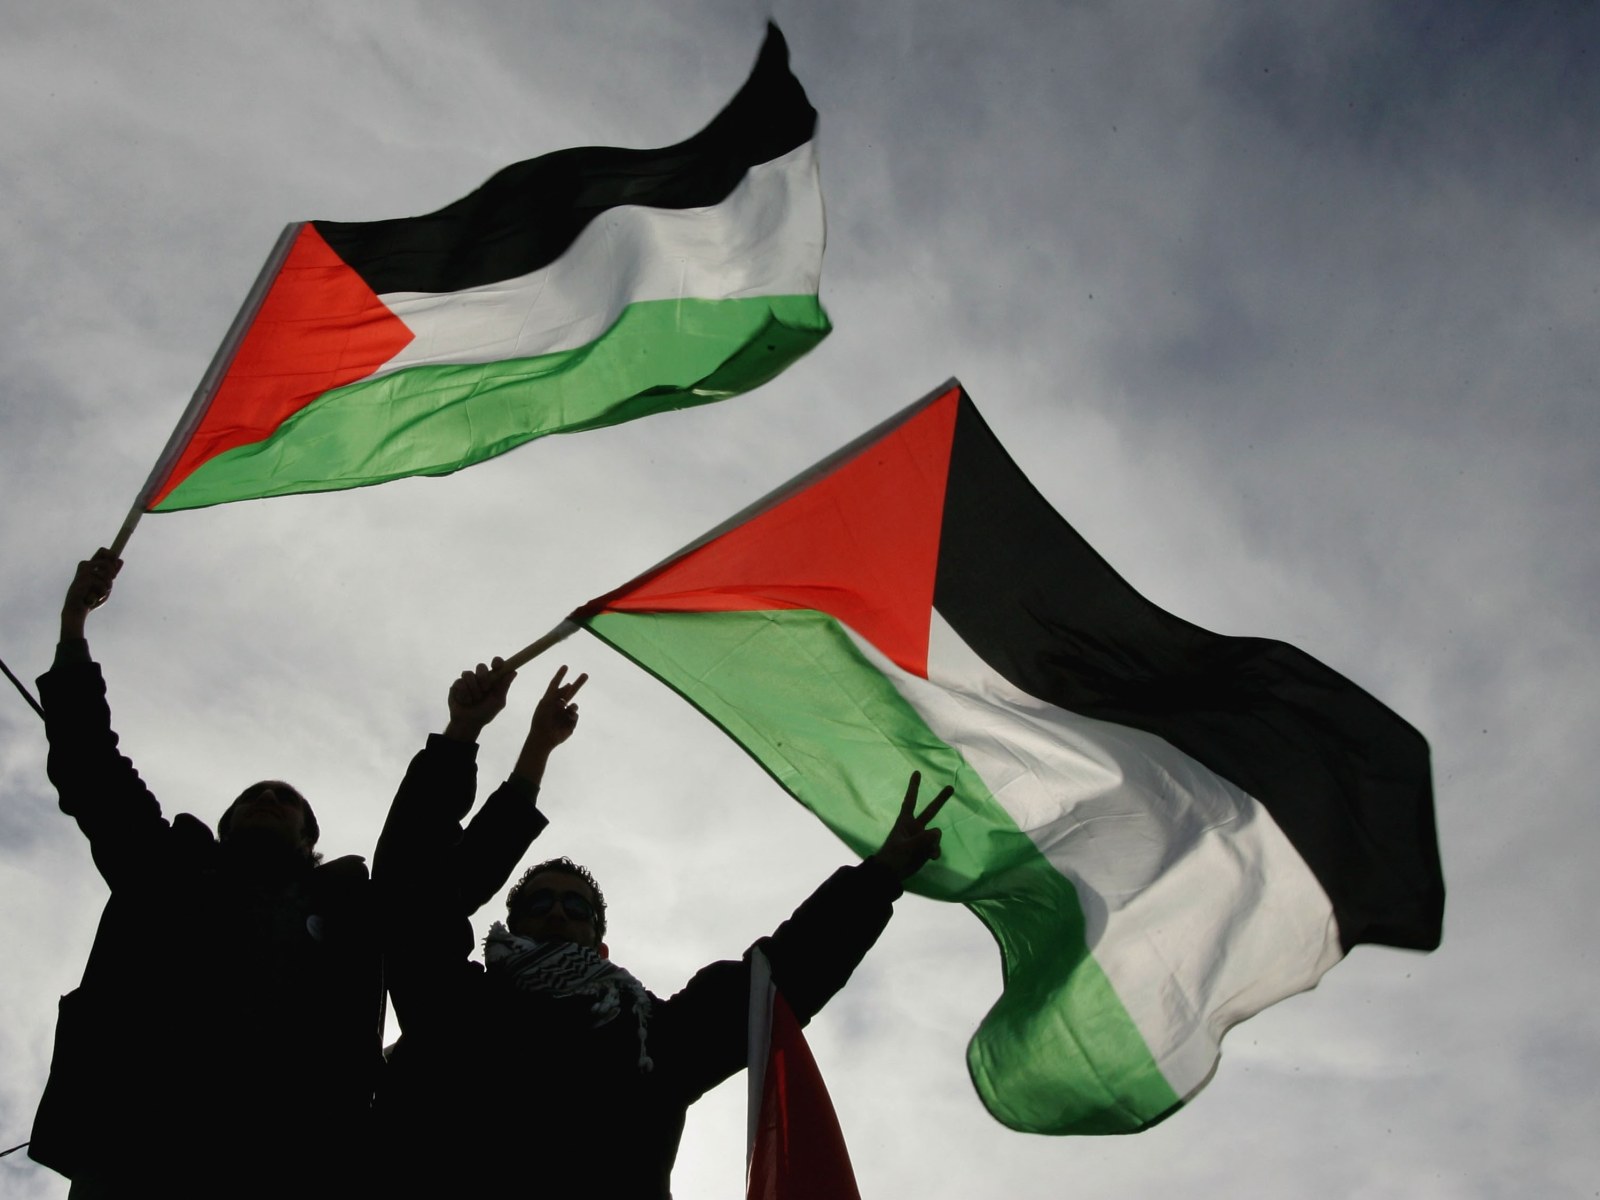 Palestinian Flag Over US Town Divides Locals